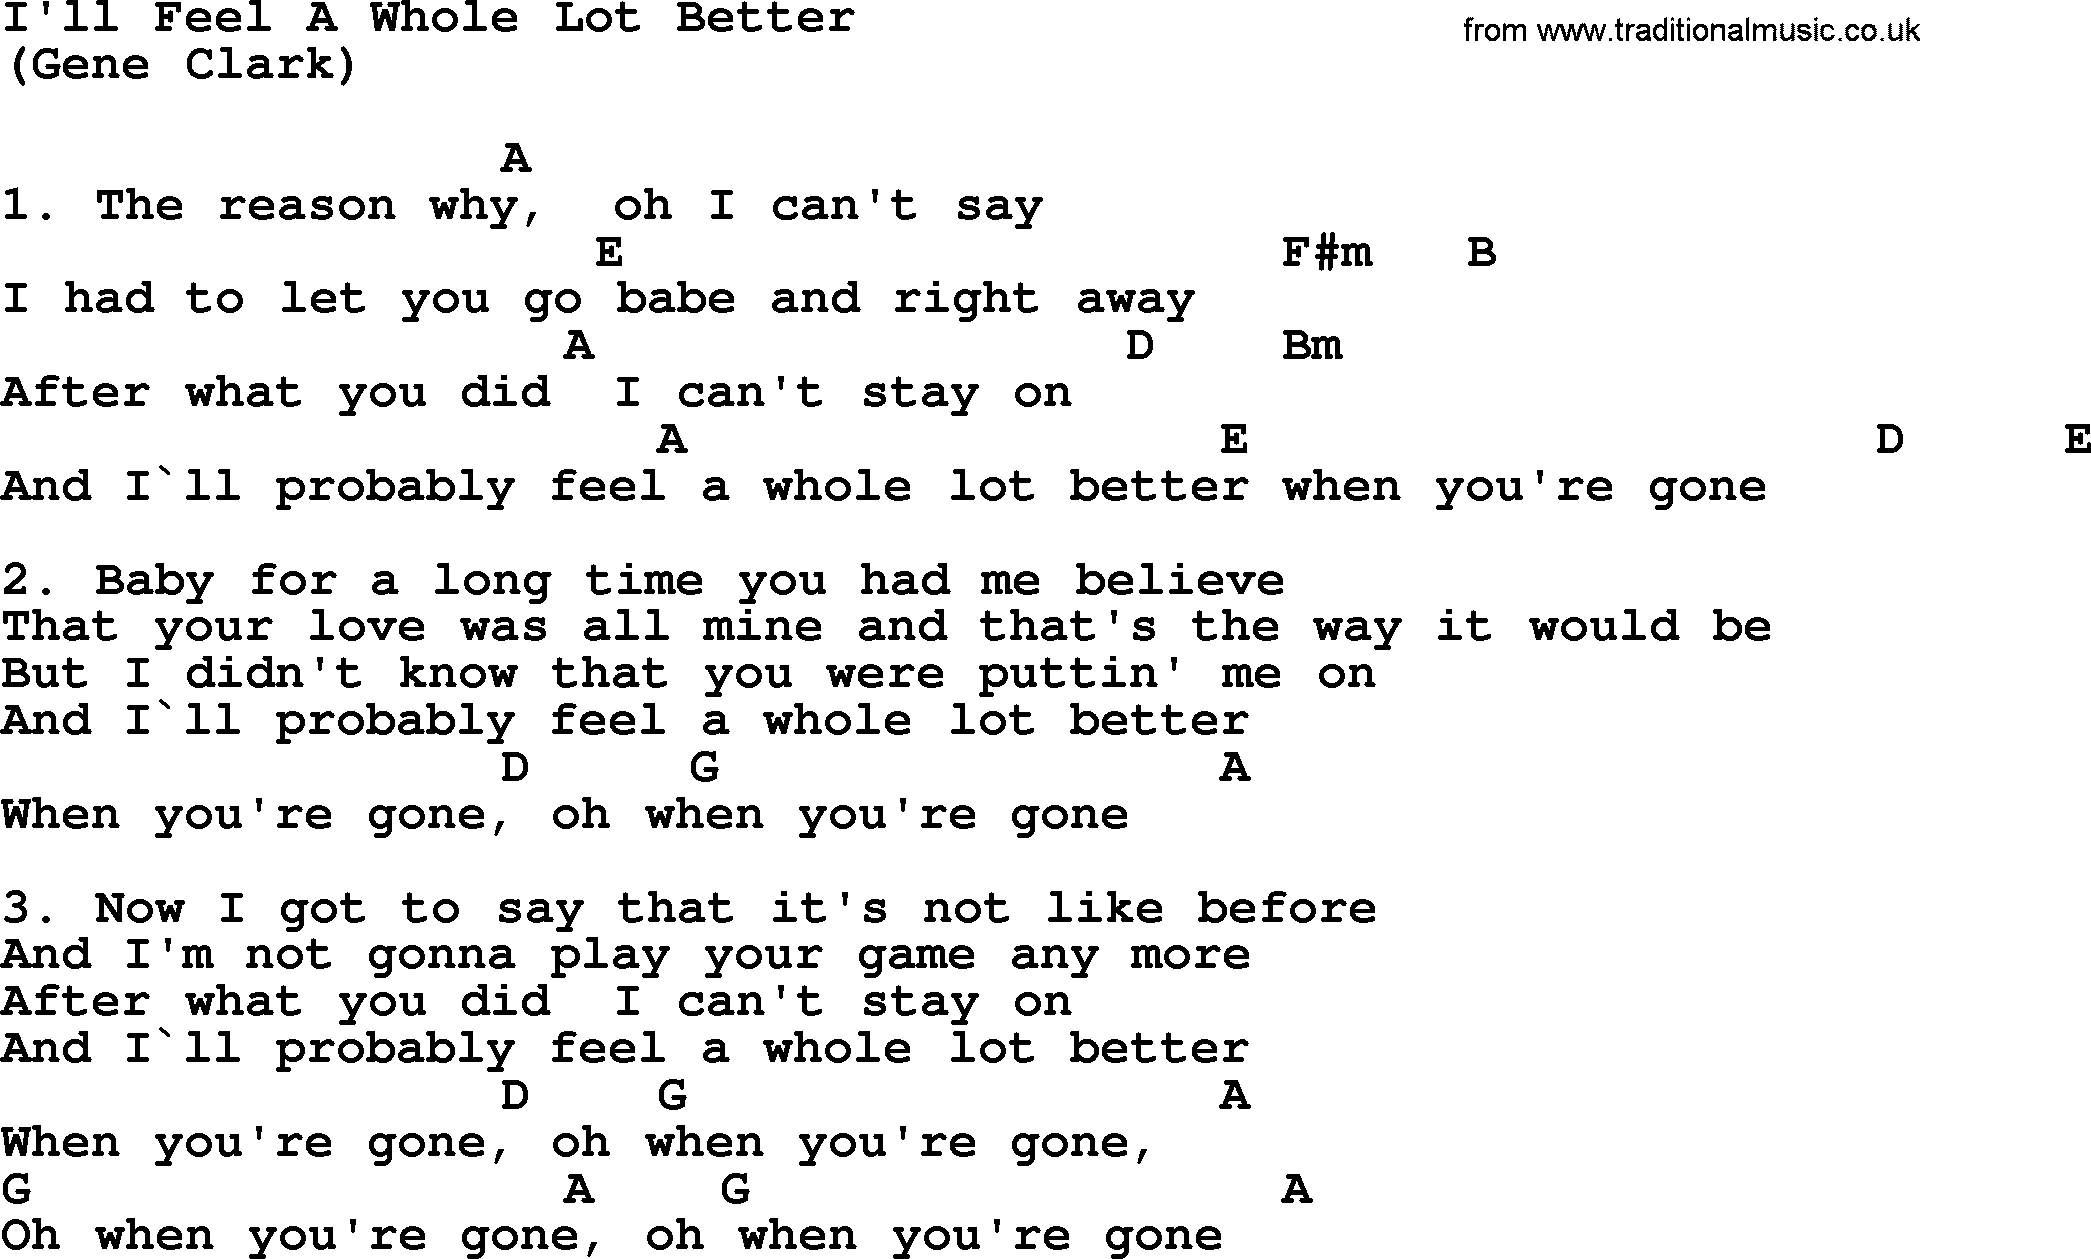 The Byrds song I'll Feel A Whole Lot Better, lyrics and chords